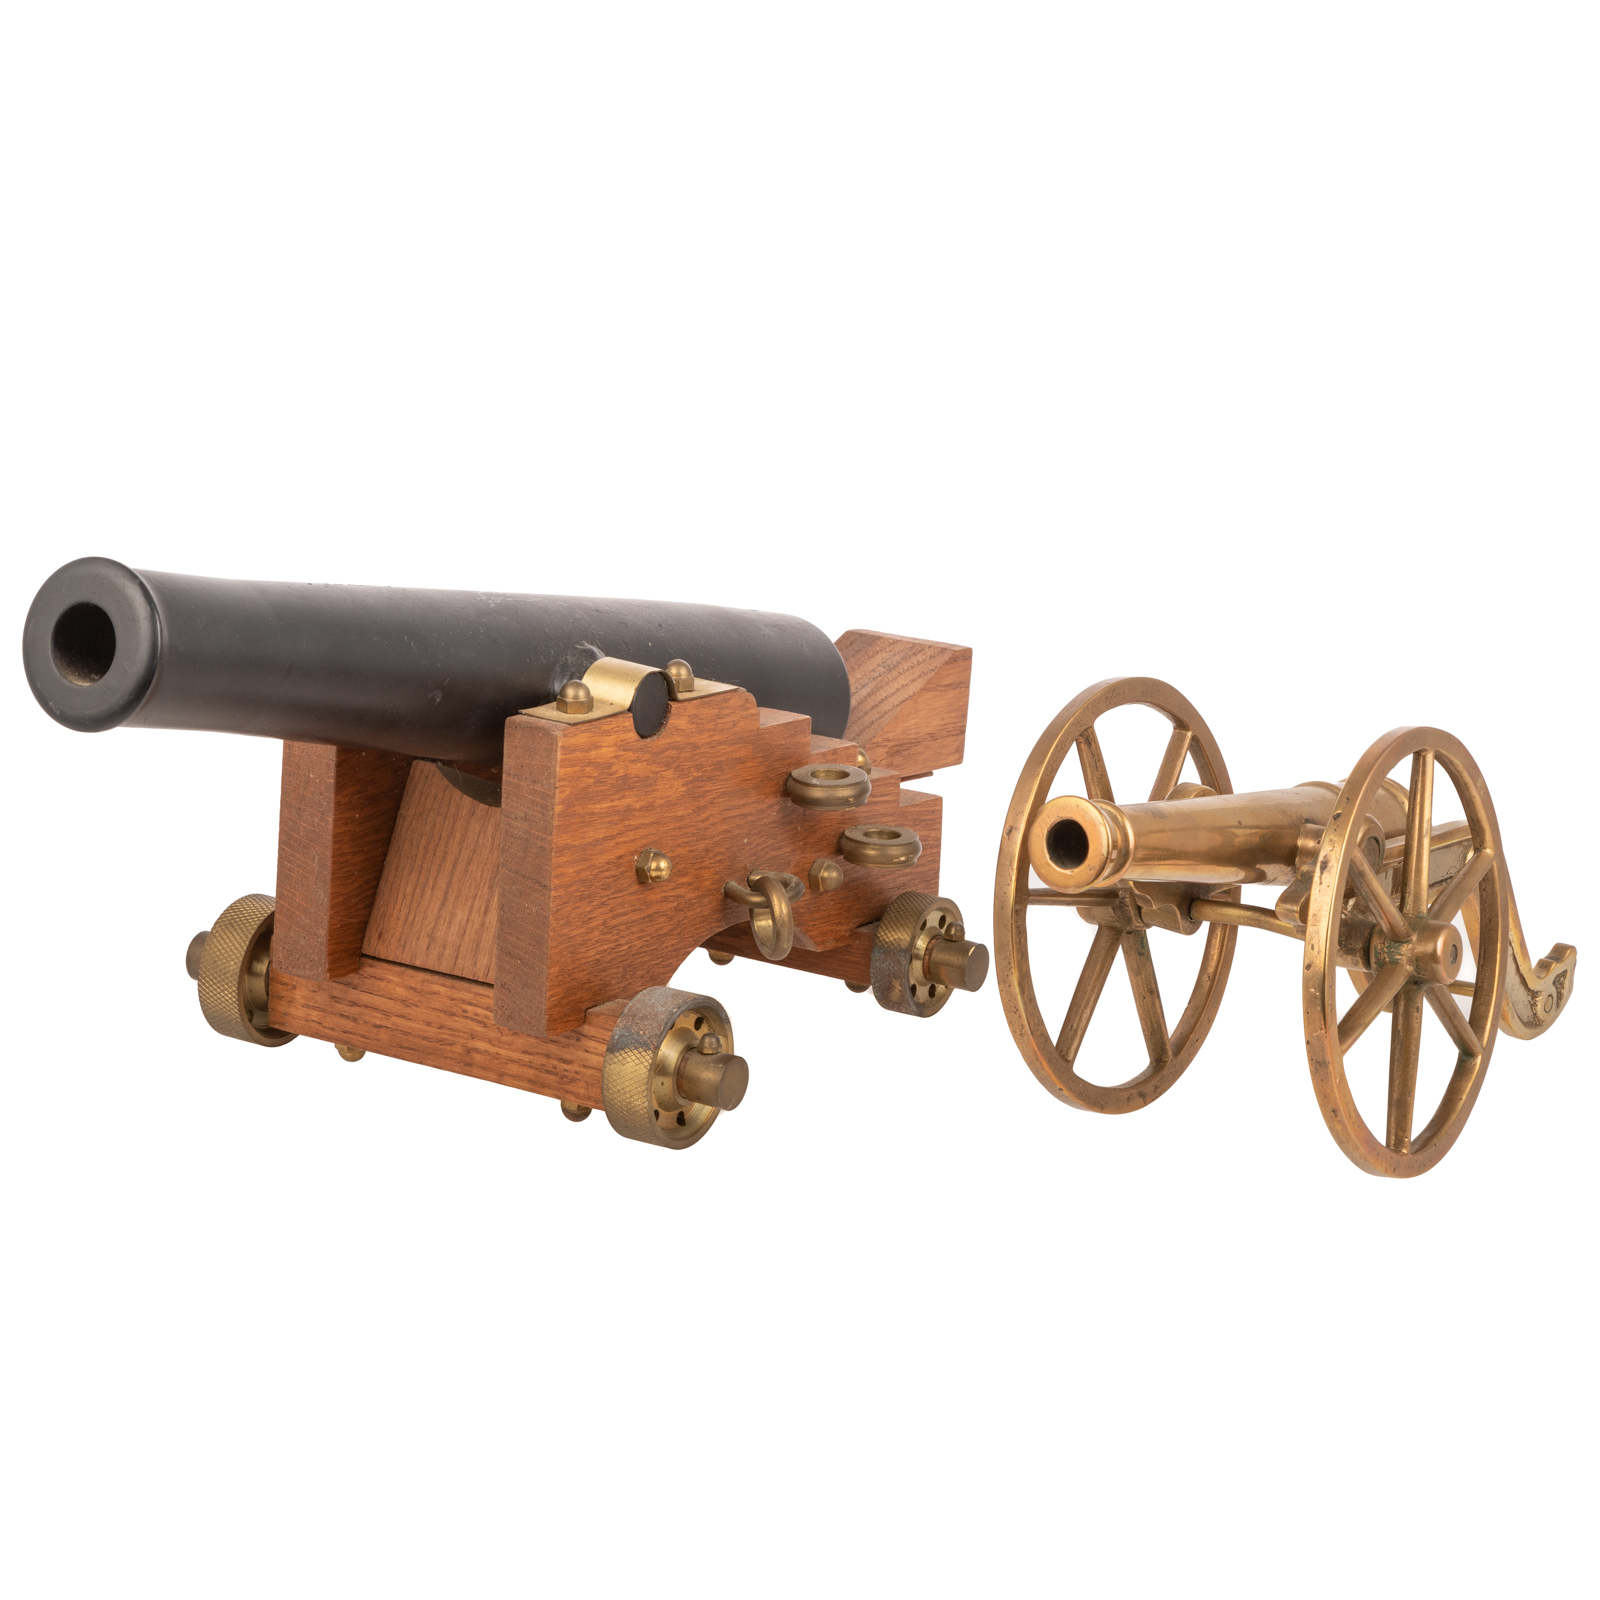 TWO MINIATURE BLACK POWDER CANNONS 369683